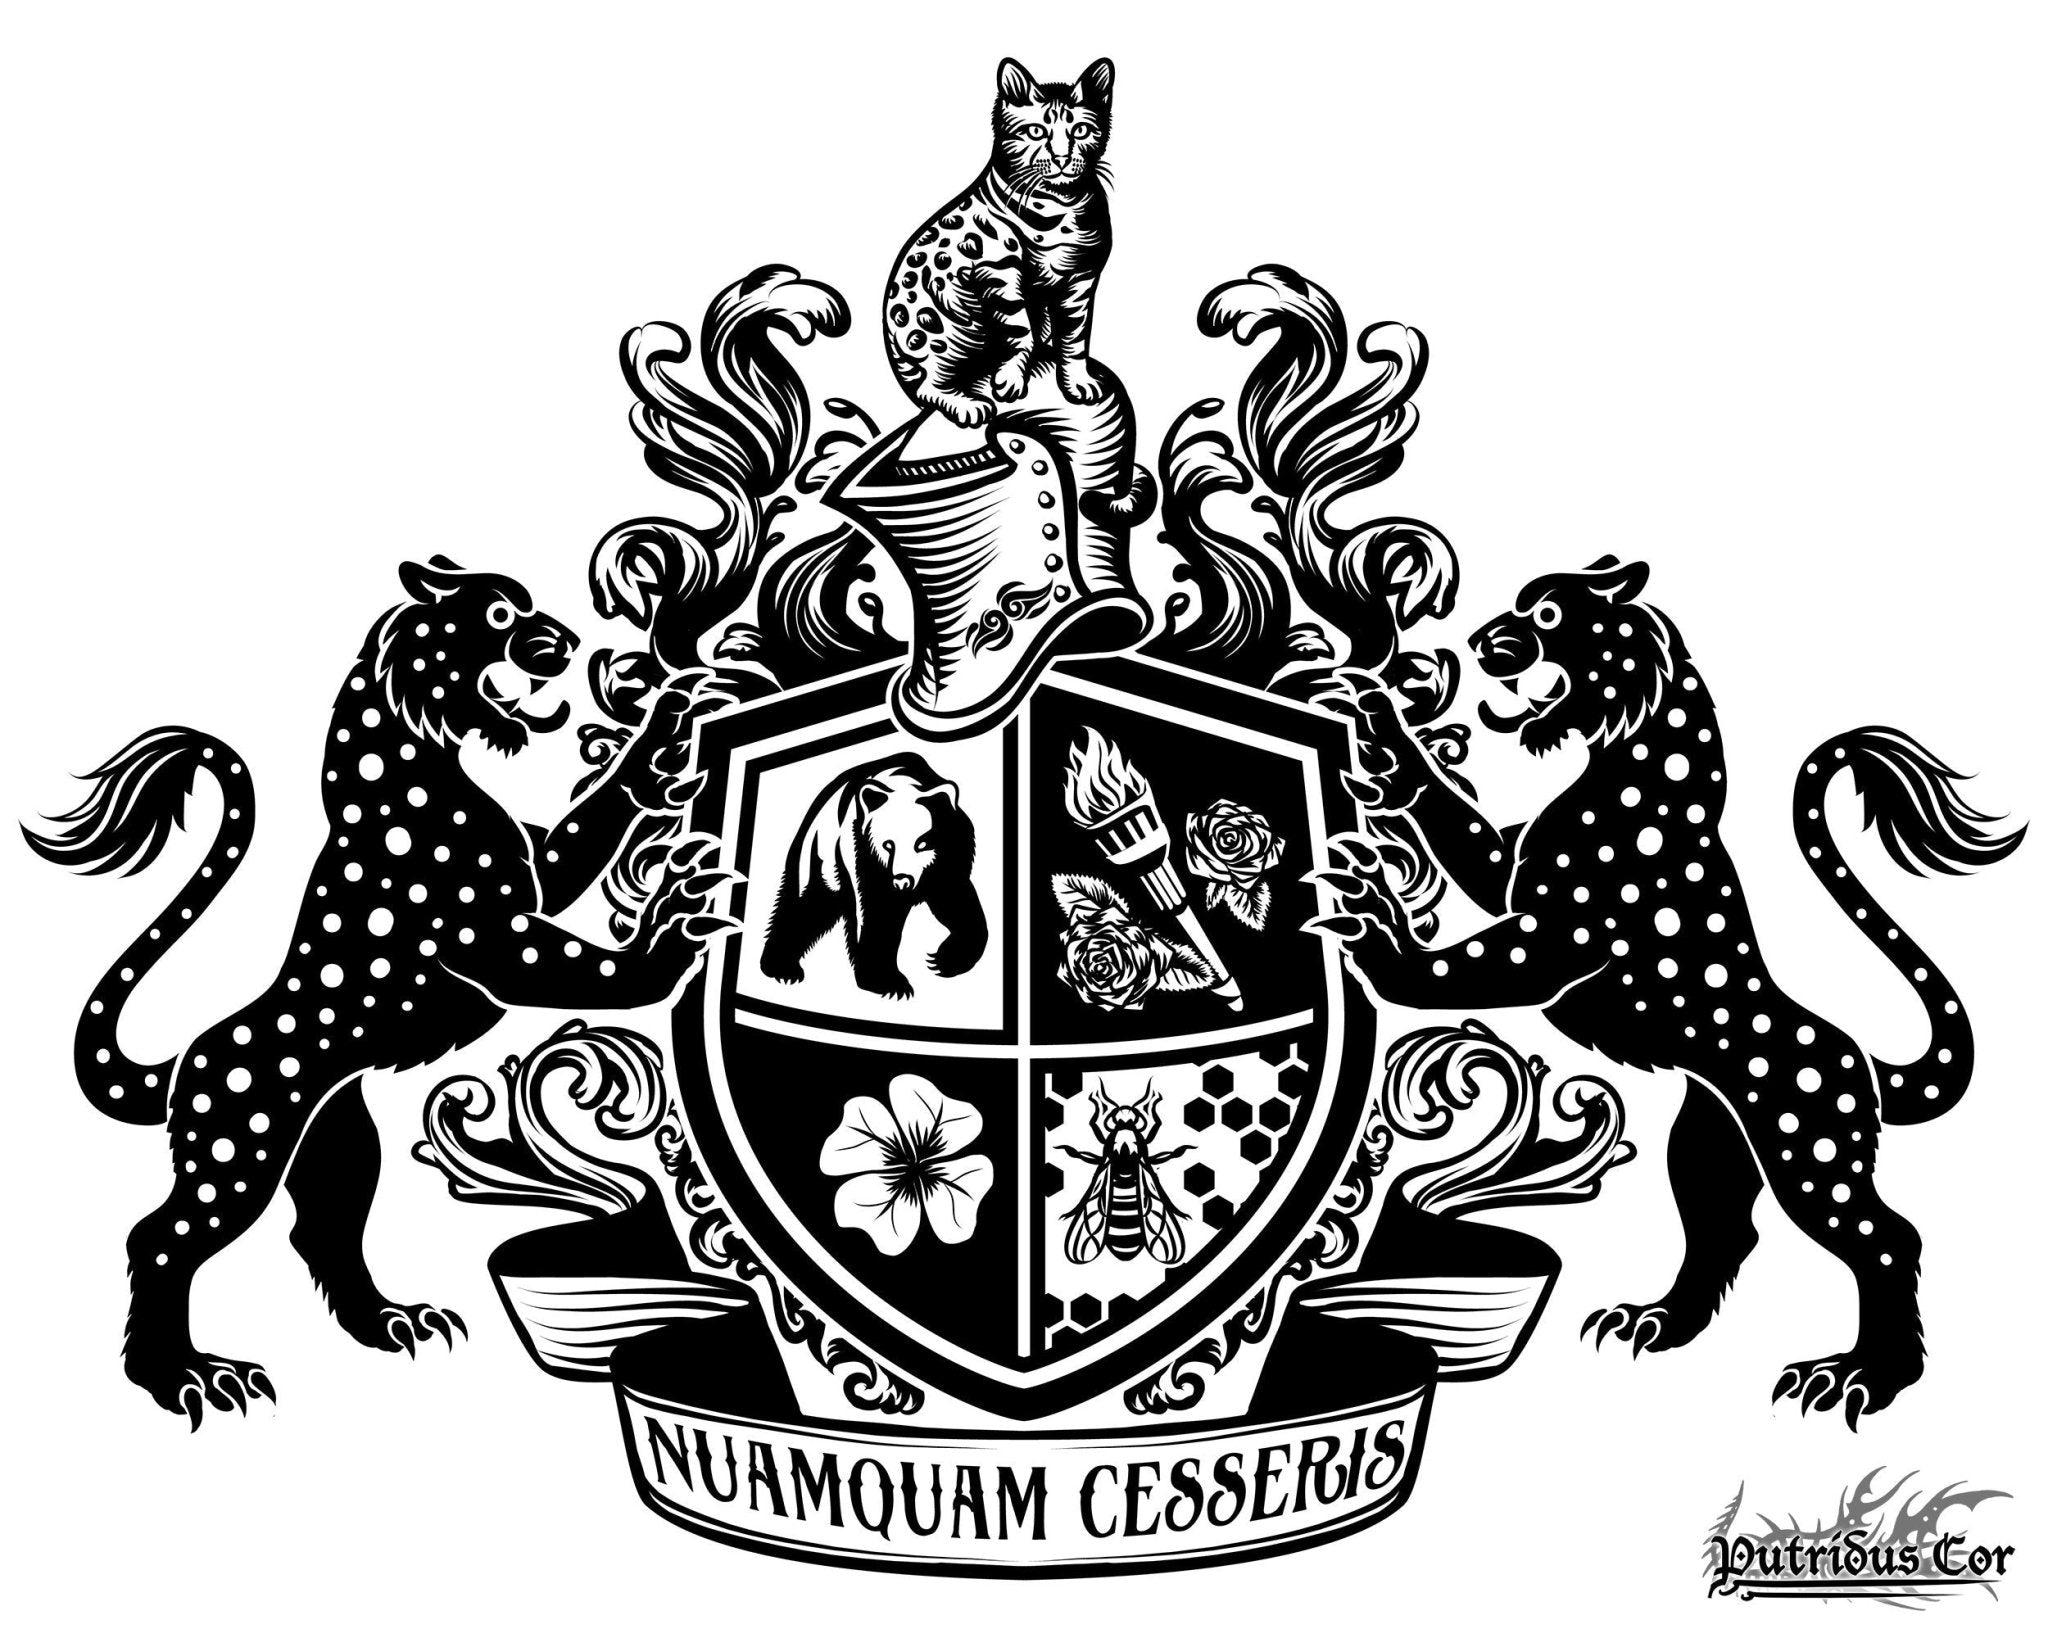 Personalized Coat of Arms, Design your own Family Crest, Custom Heraldry Art, or Emblem Logo - Graphic Design Services